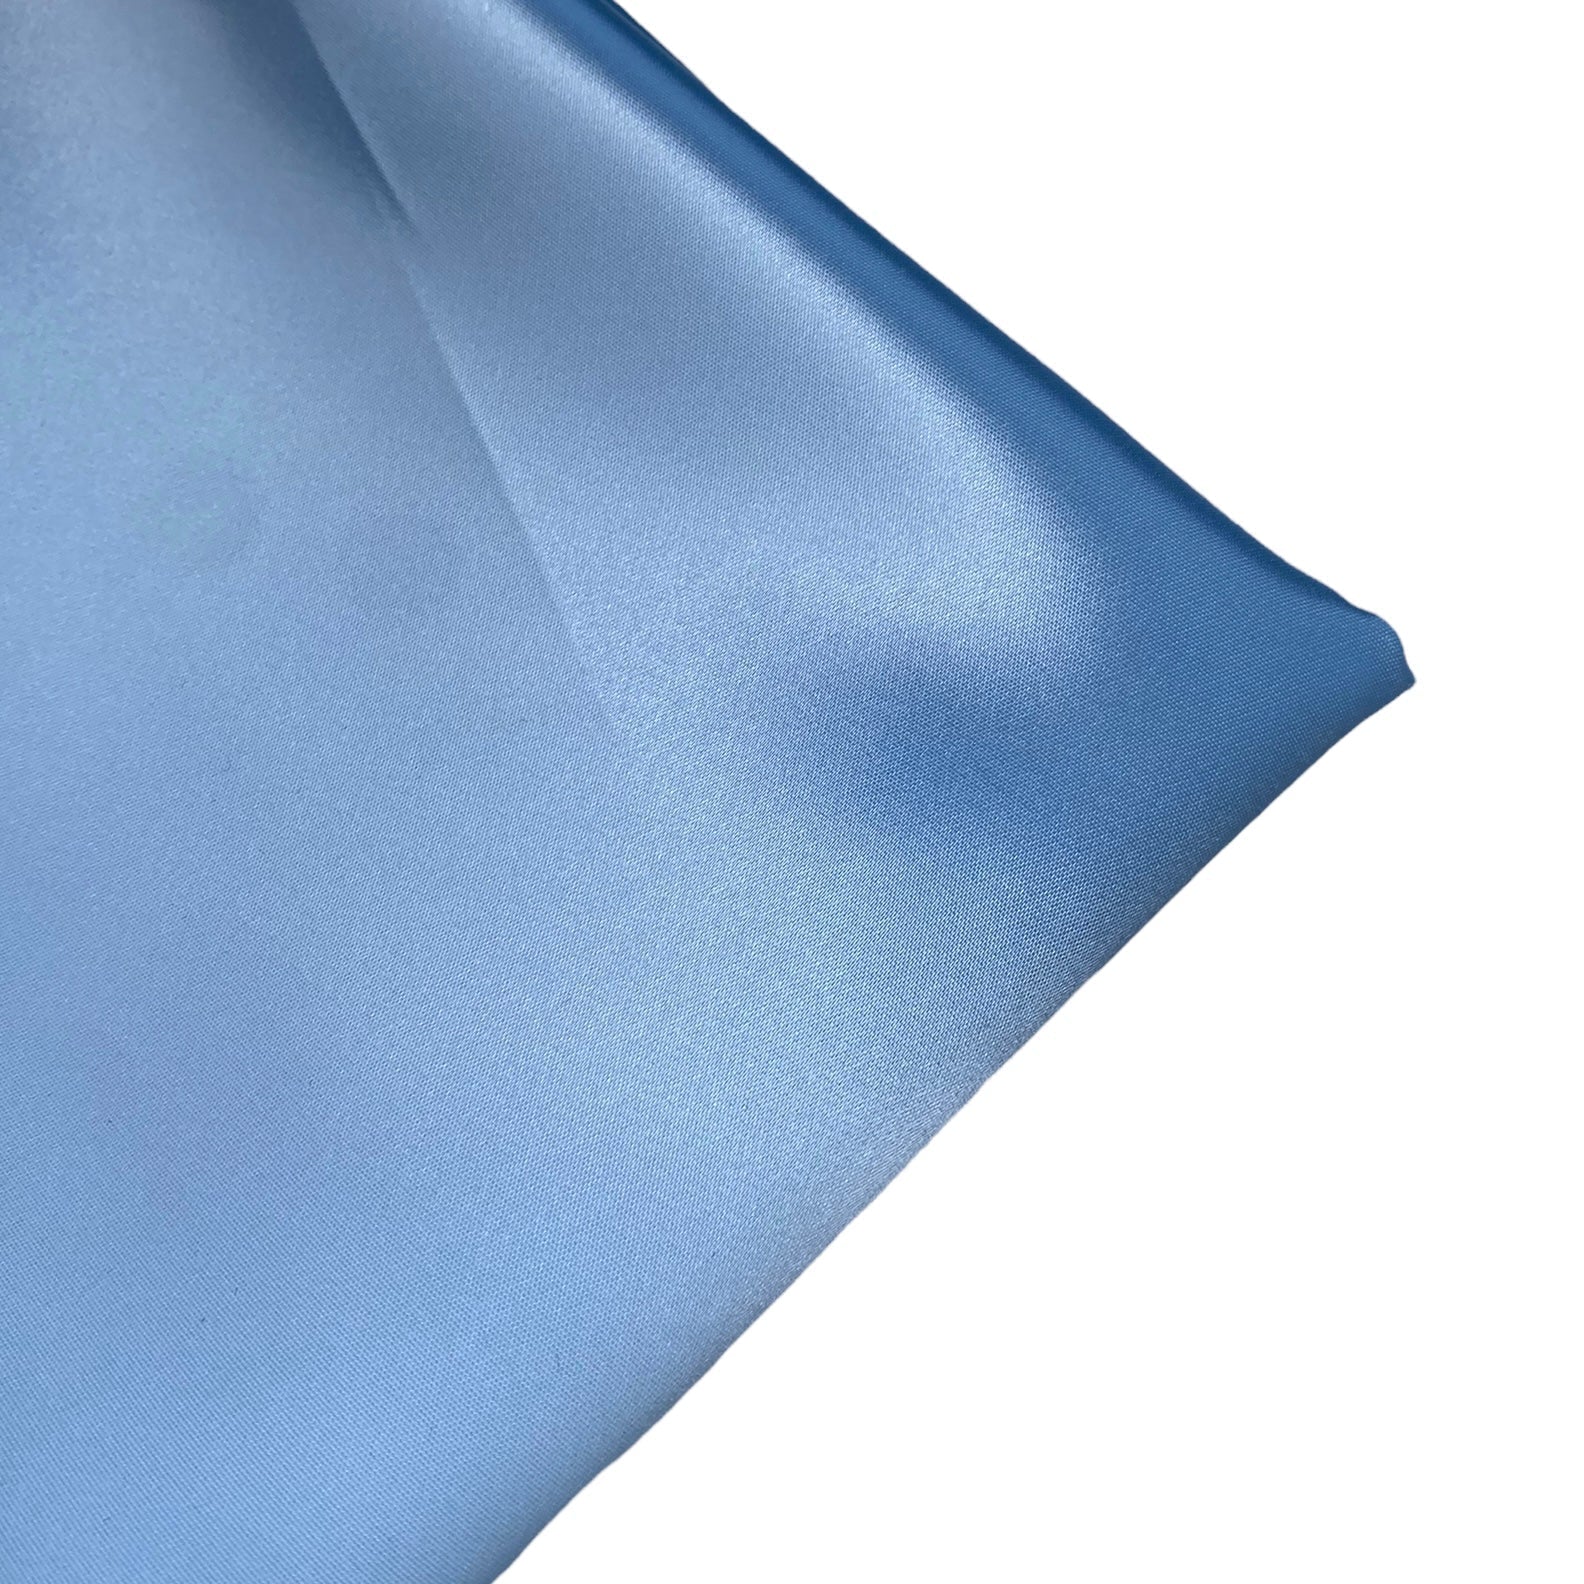 Polyester Satin - 44” - Pale Turquoise